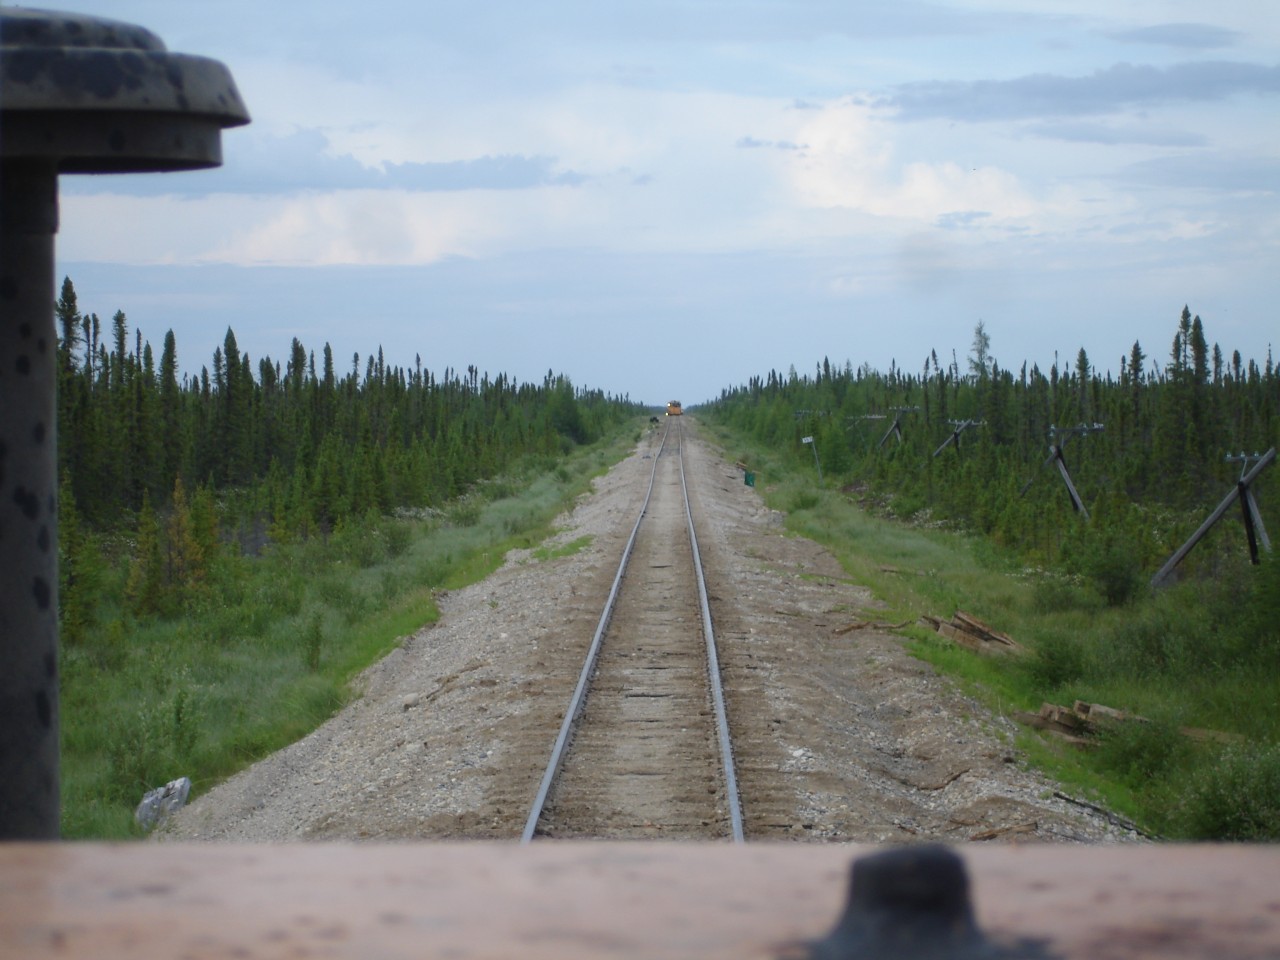 In this view from the cab of a piece of MOW equipment, HBRY's 30 m.p.h. main line to Churchill, MB is looking pretty good after a tie gang has rolled through and done its job.  The lack of ballast, the tripod pole line, and the dwarfed landscape are very characteristic of this portion of the line. Make sure you packed a lunch because its a long way to anywhere from here! David Wylie photo submitted with permission.